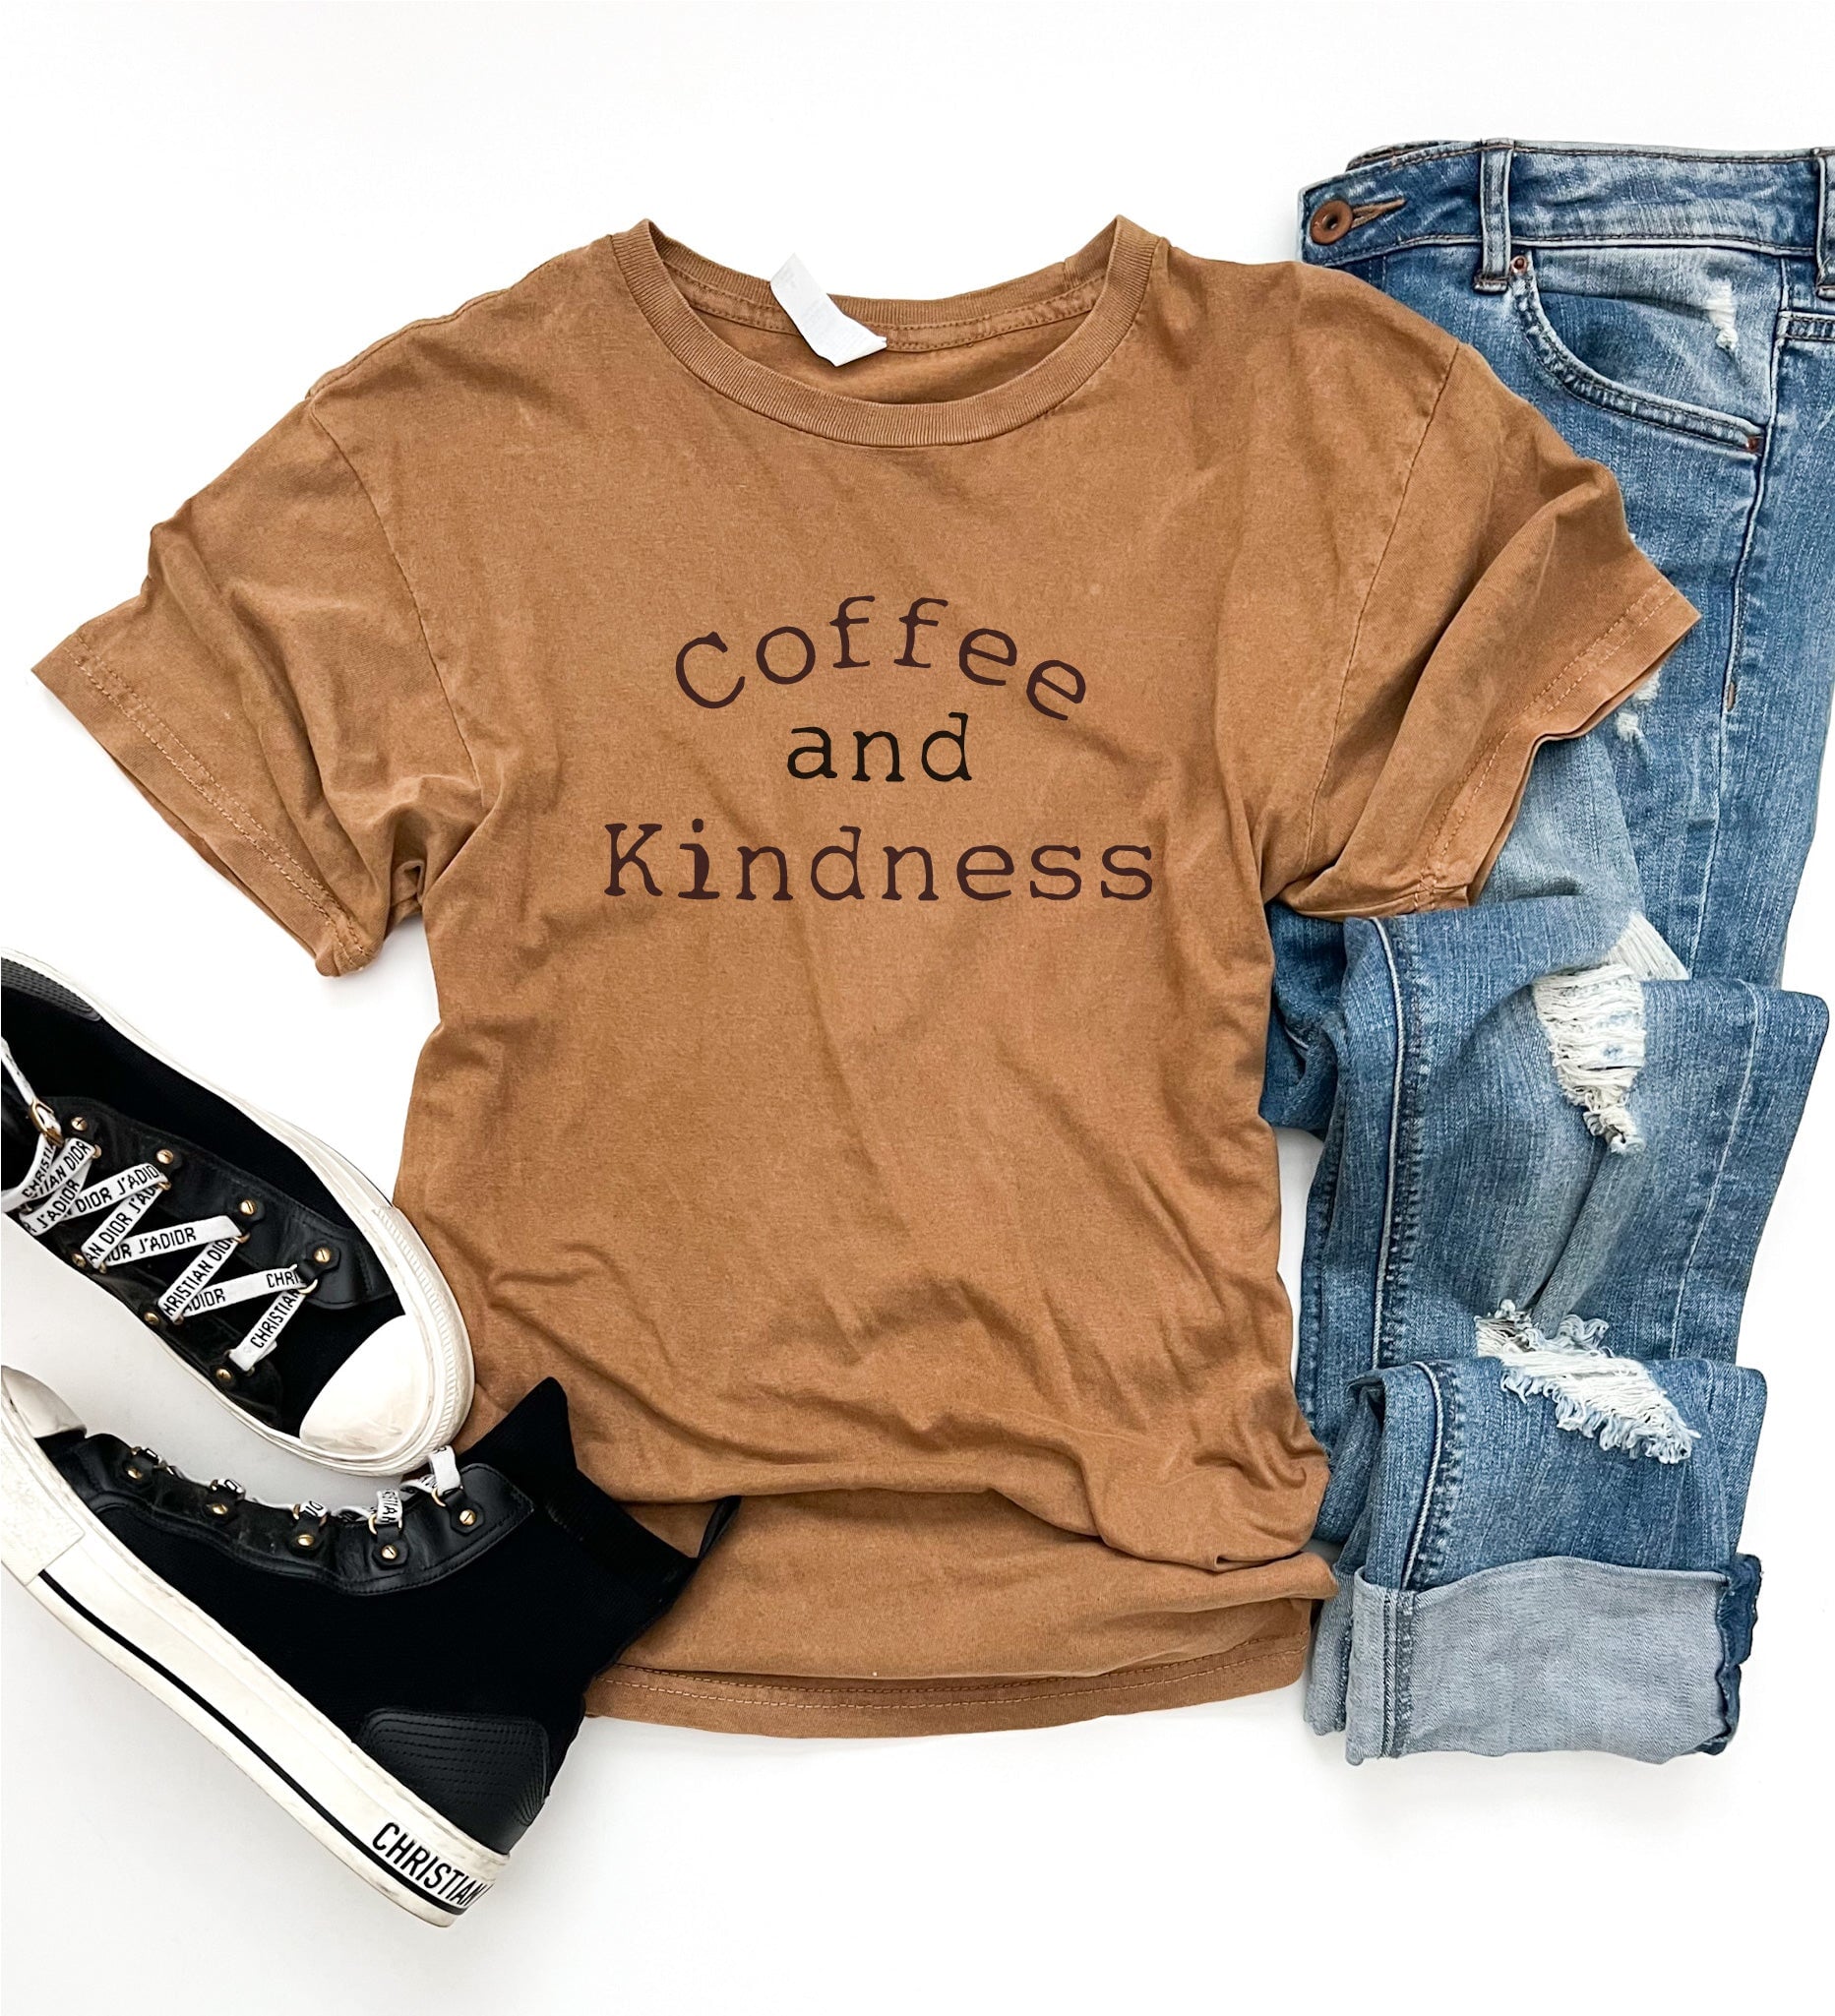 Coffee and kindness vintage wash tee Short sleeve miscellaneous tee Lane 7 15004 Camel 